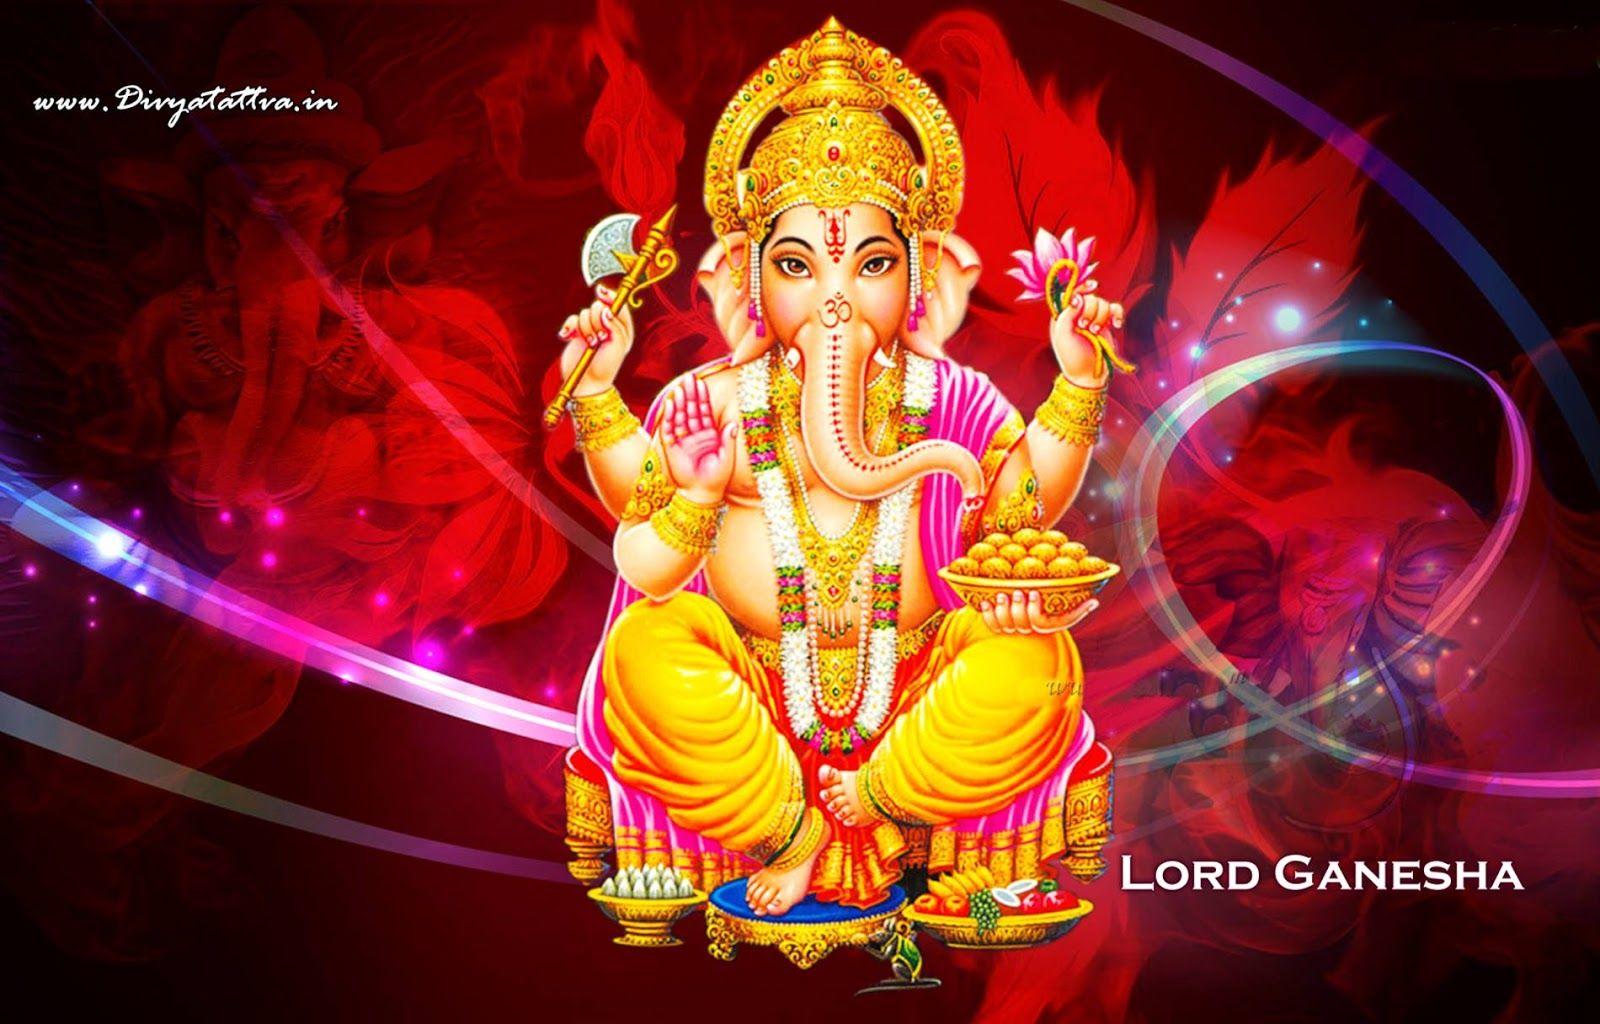 Lord Ganesha Wallpapers - Top Free Lord Ganesha Backgrounds ...